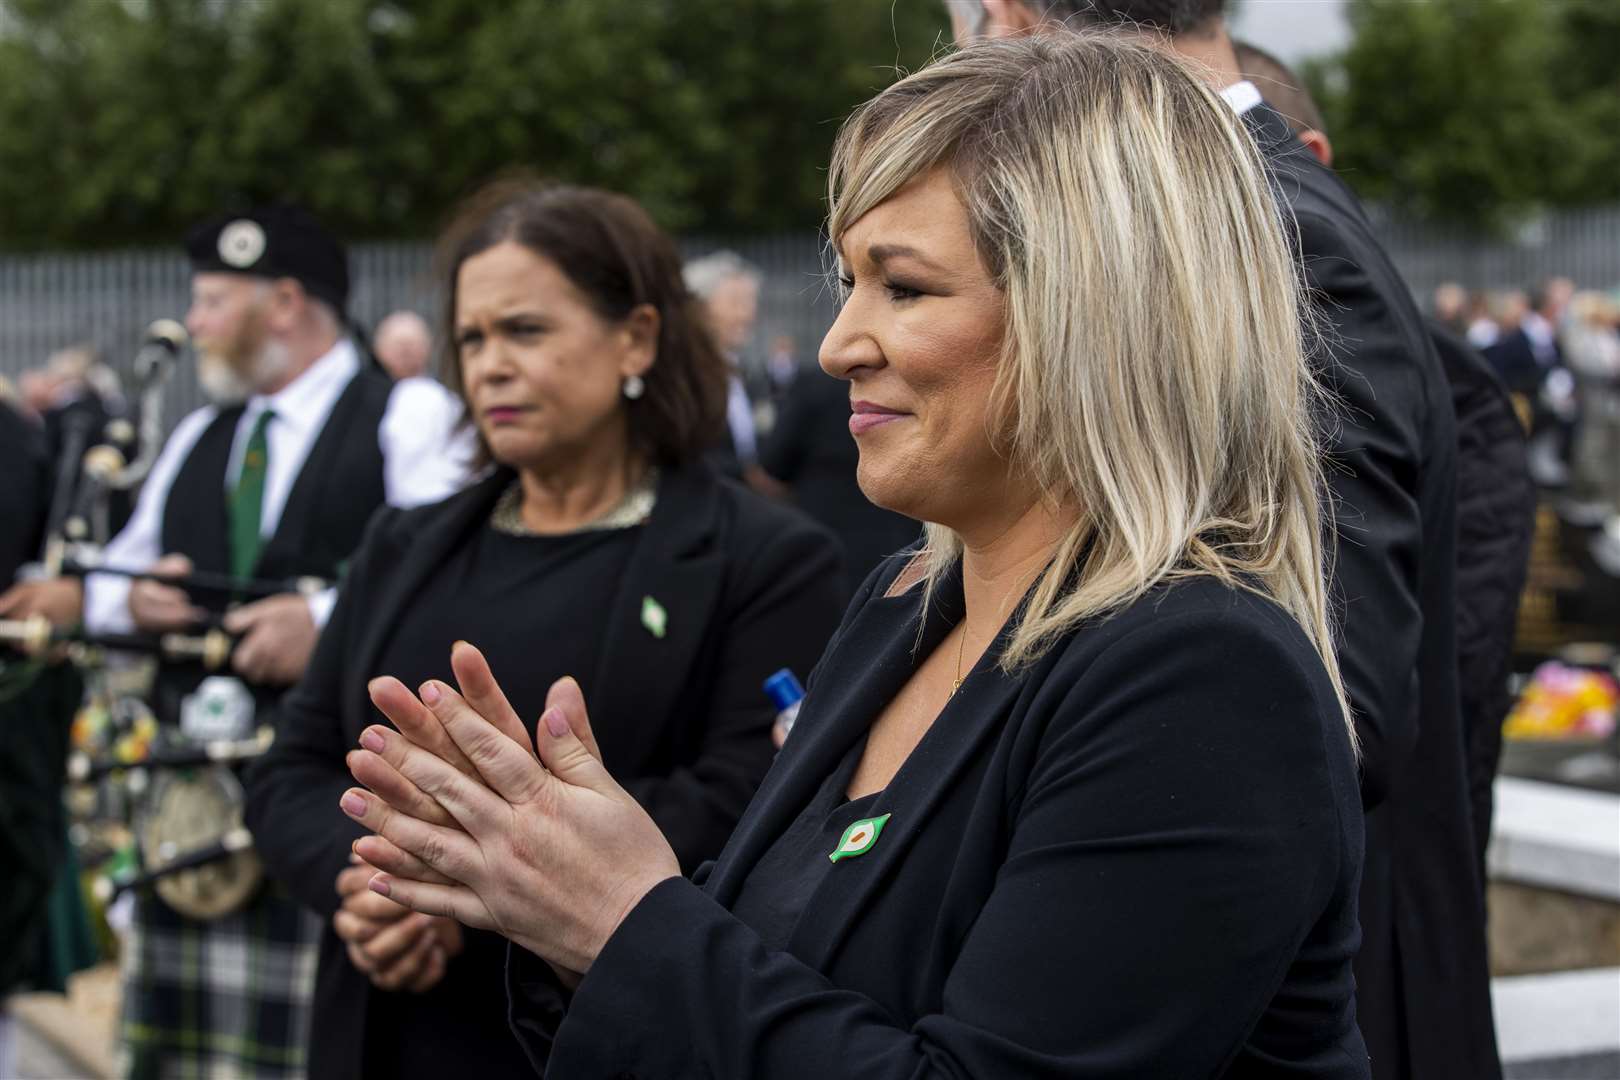 Former deputy first minister Michelle O’Neill during the funeral of senior republican figure Bobby Storey (Liam McBurney/PA)